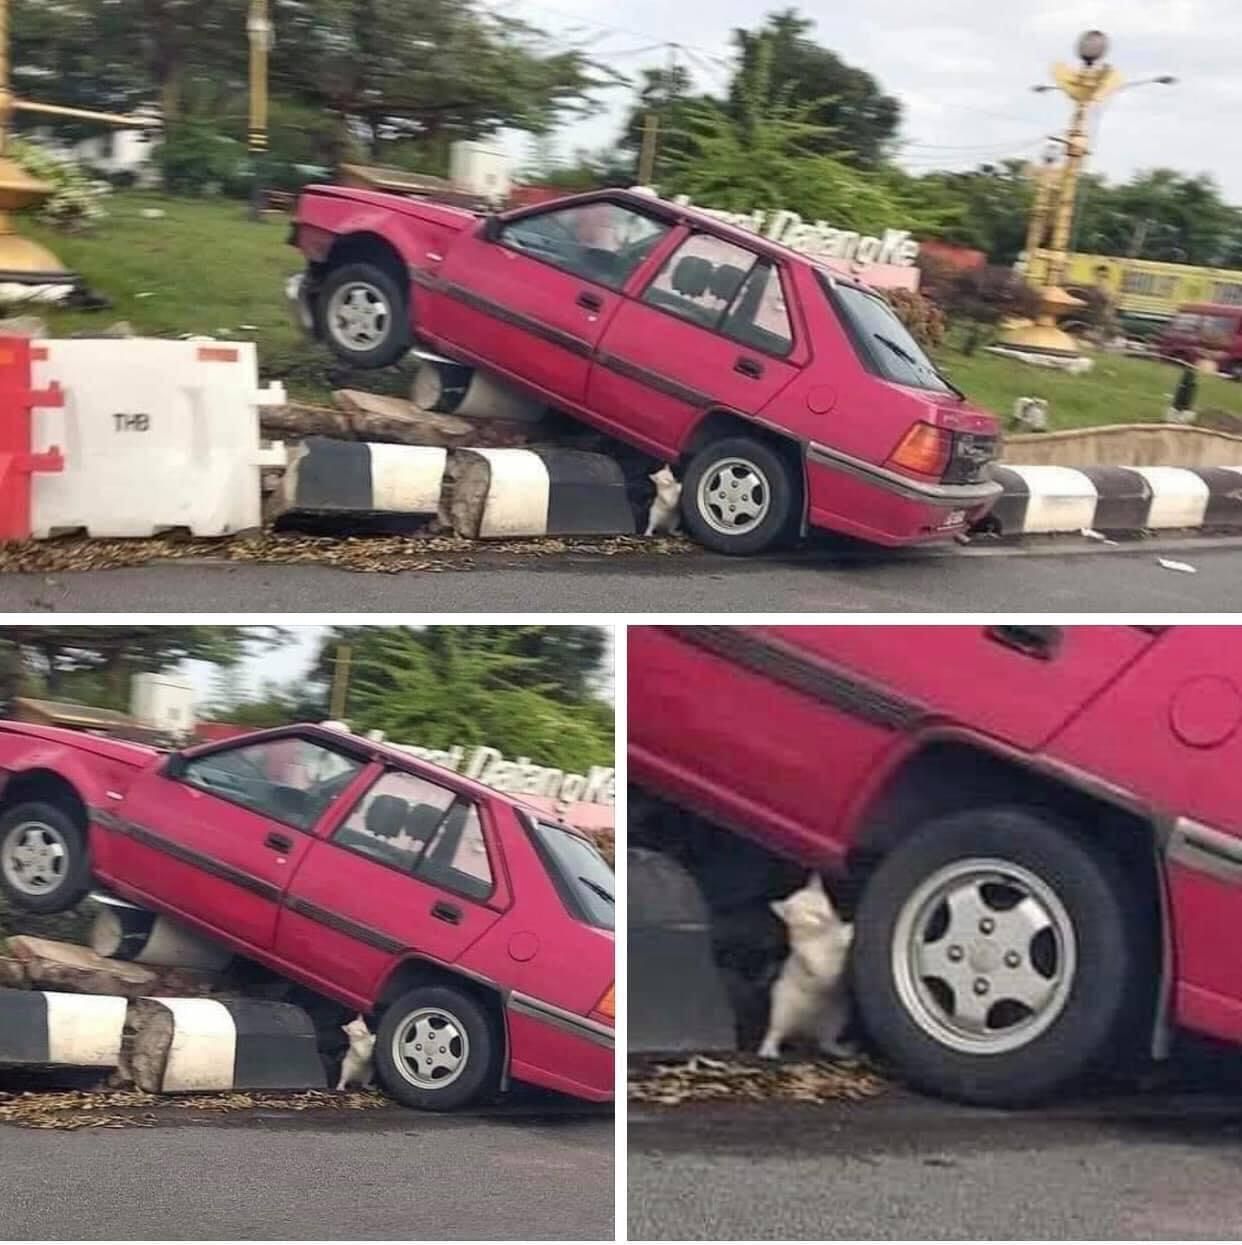 The car’s owner was so lucky to have the cat there